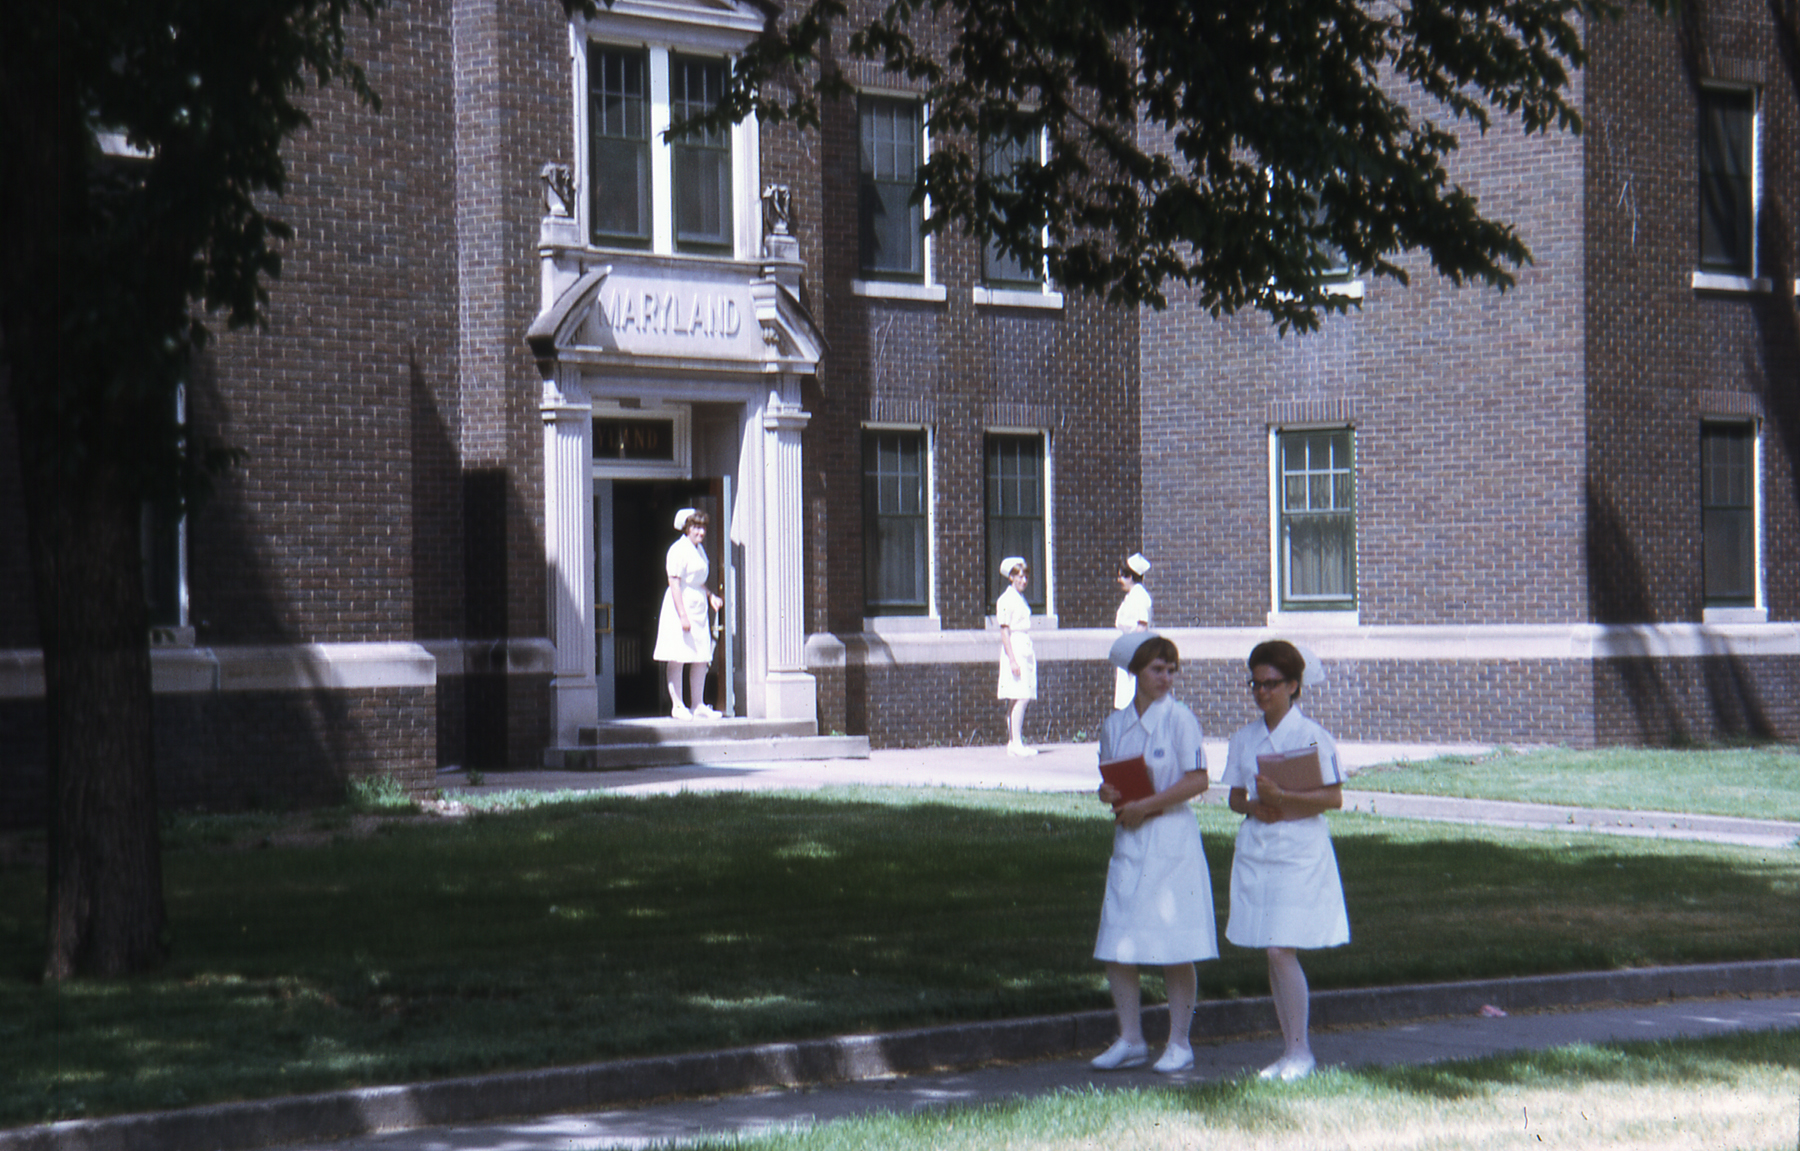 Mary Lanning School of Nursing. Student nurses in front of Maryland Hotel, 1968. Courtesy of Adams County Historical Society.